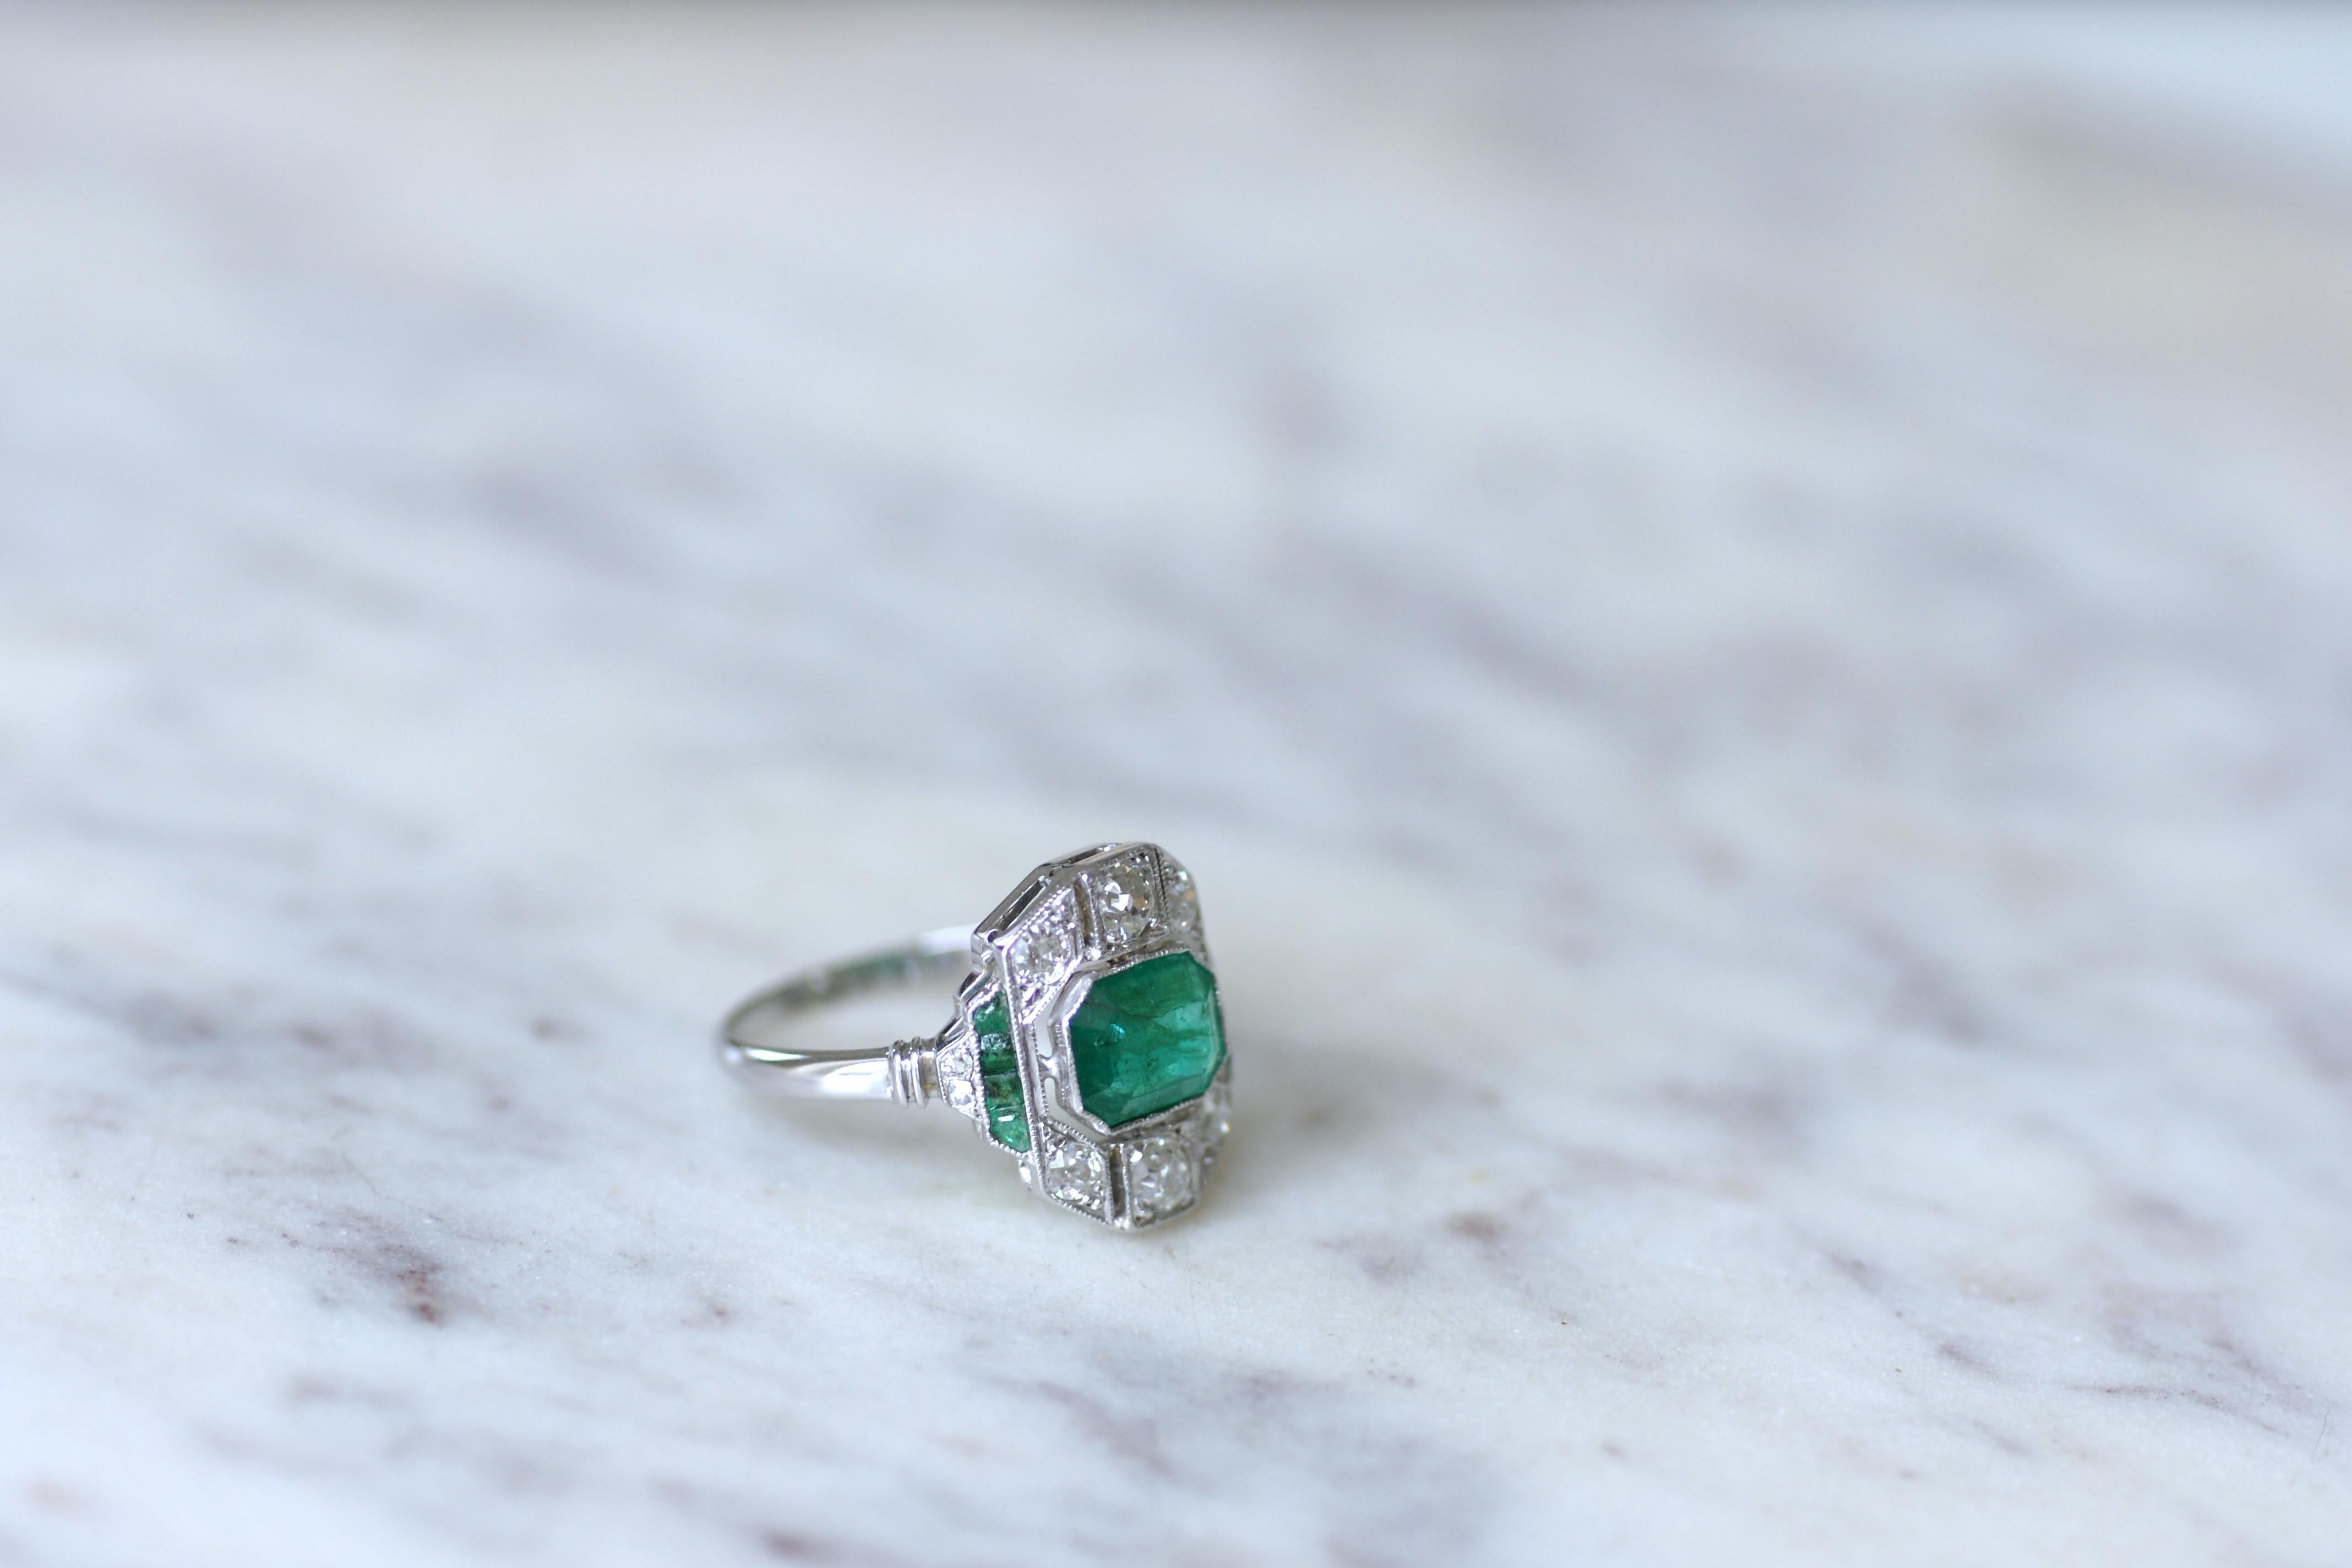 French Art Deco Certified 1, 30 Carat Emerald Ring on White Gold with Diamonds For Sale 5